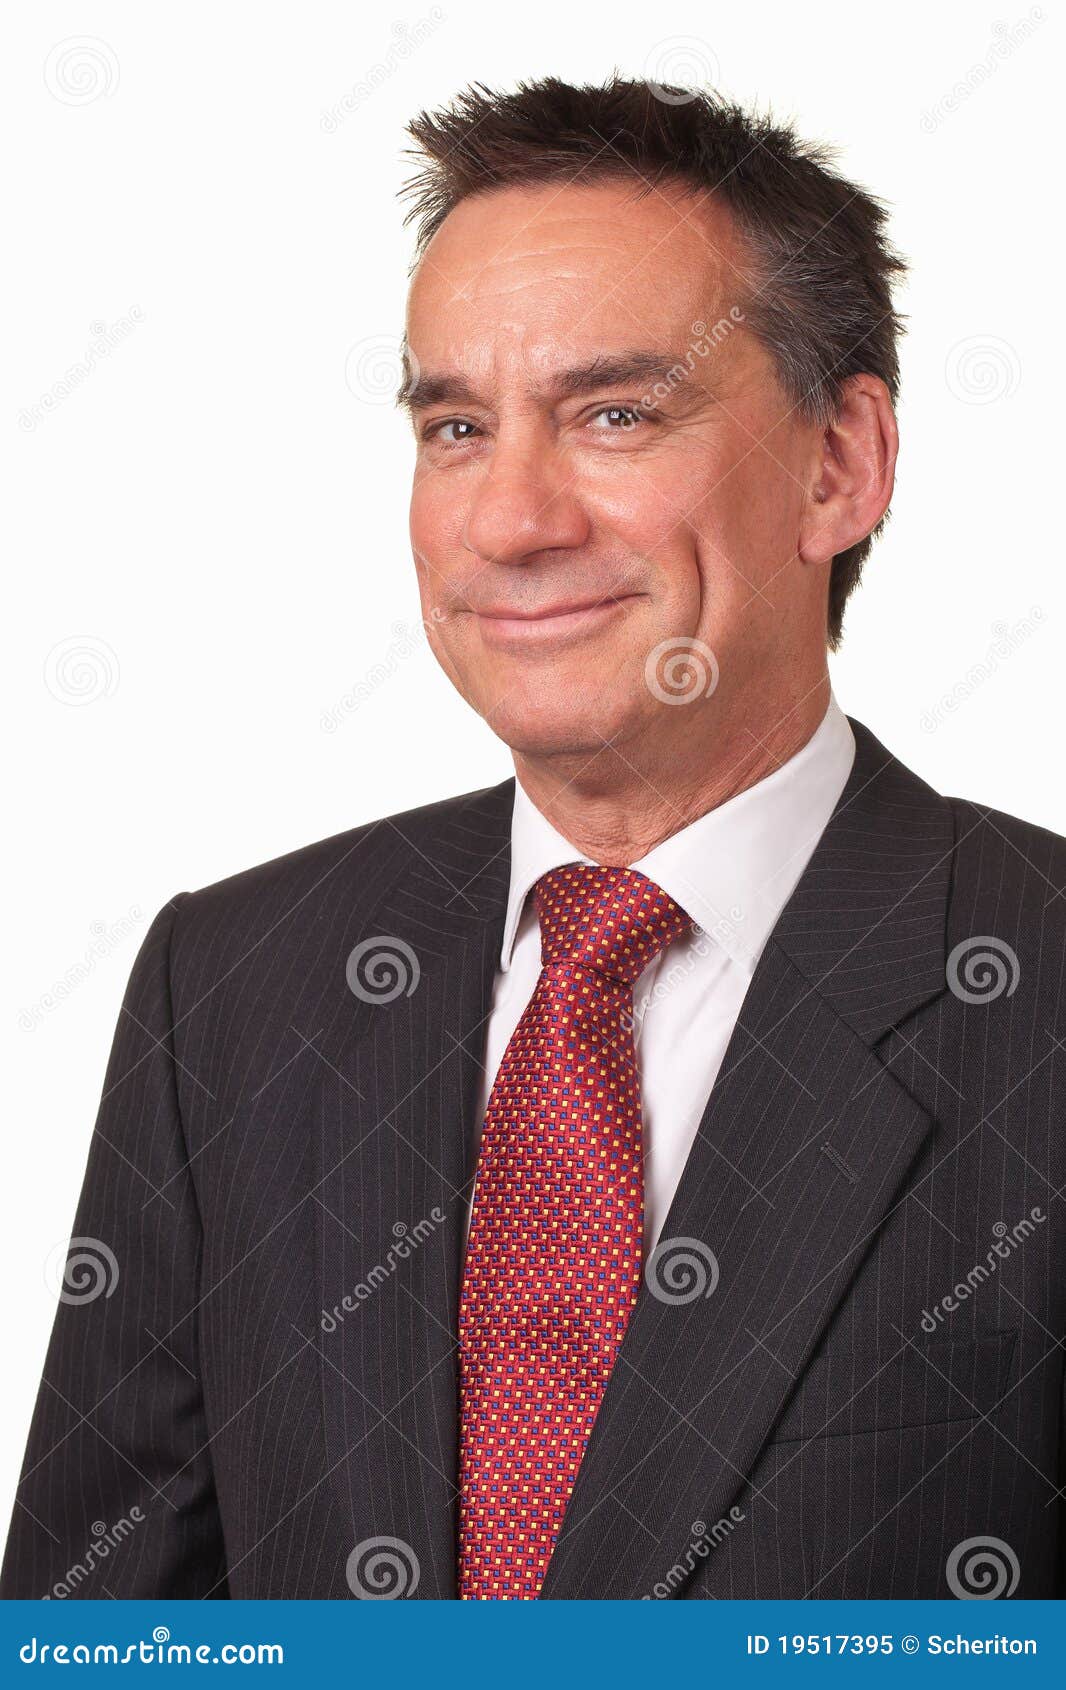 business man in suit with cheeky grin